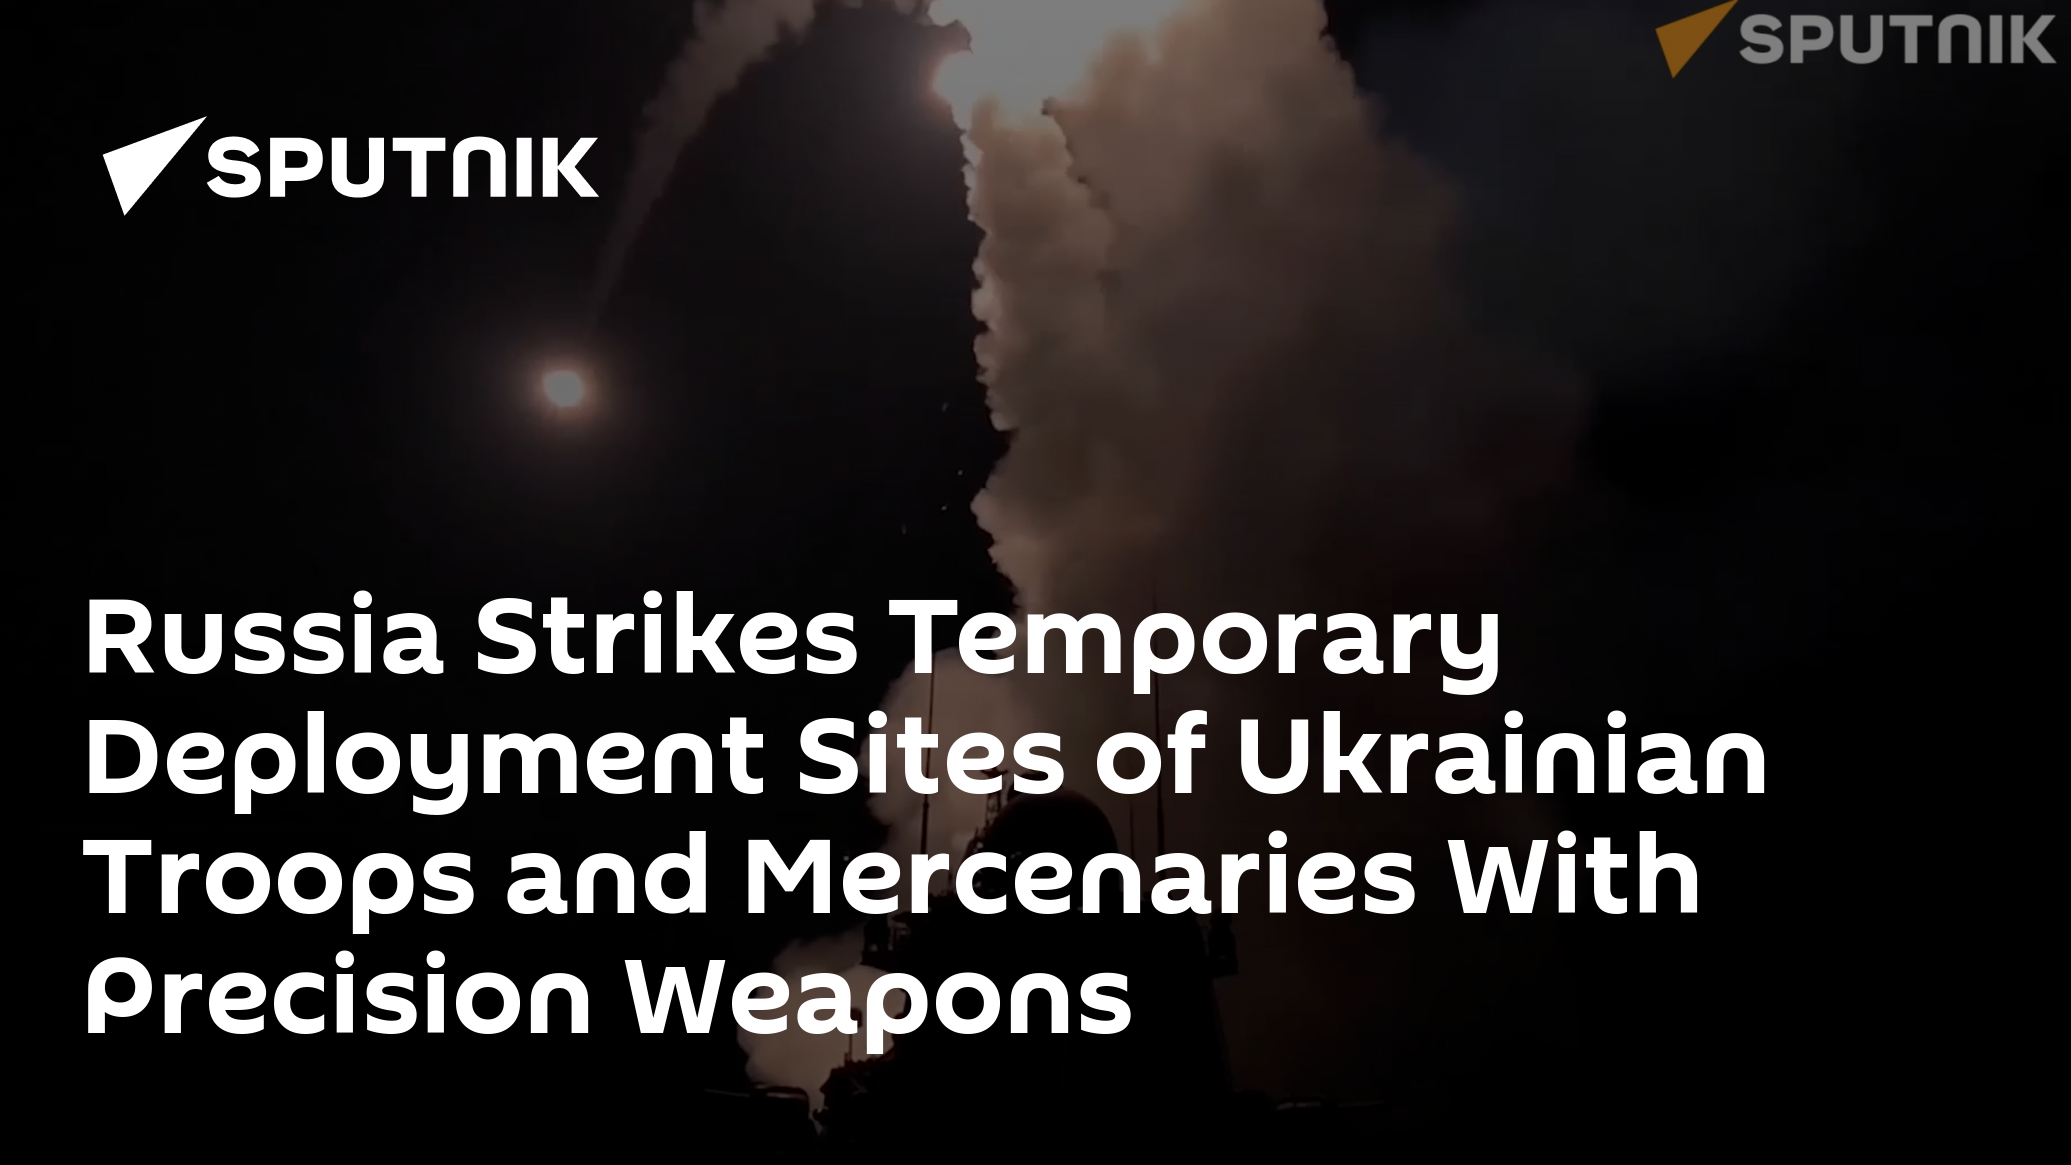 Russia Strikes Temporary Deployment Sites of Ukrainian Troops and Mercenaries With Precision Weapons